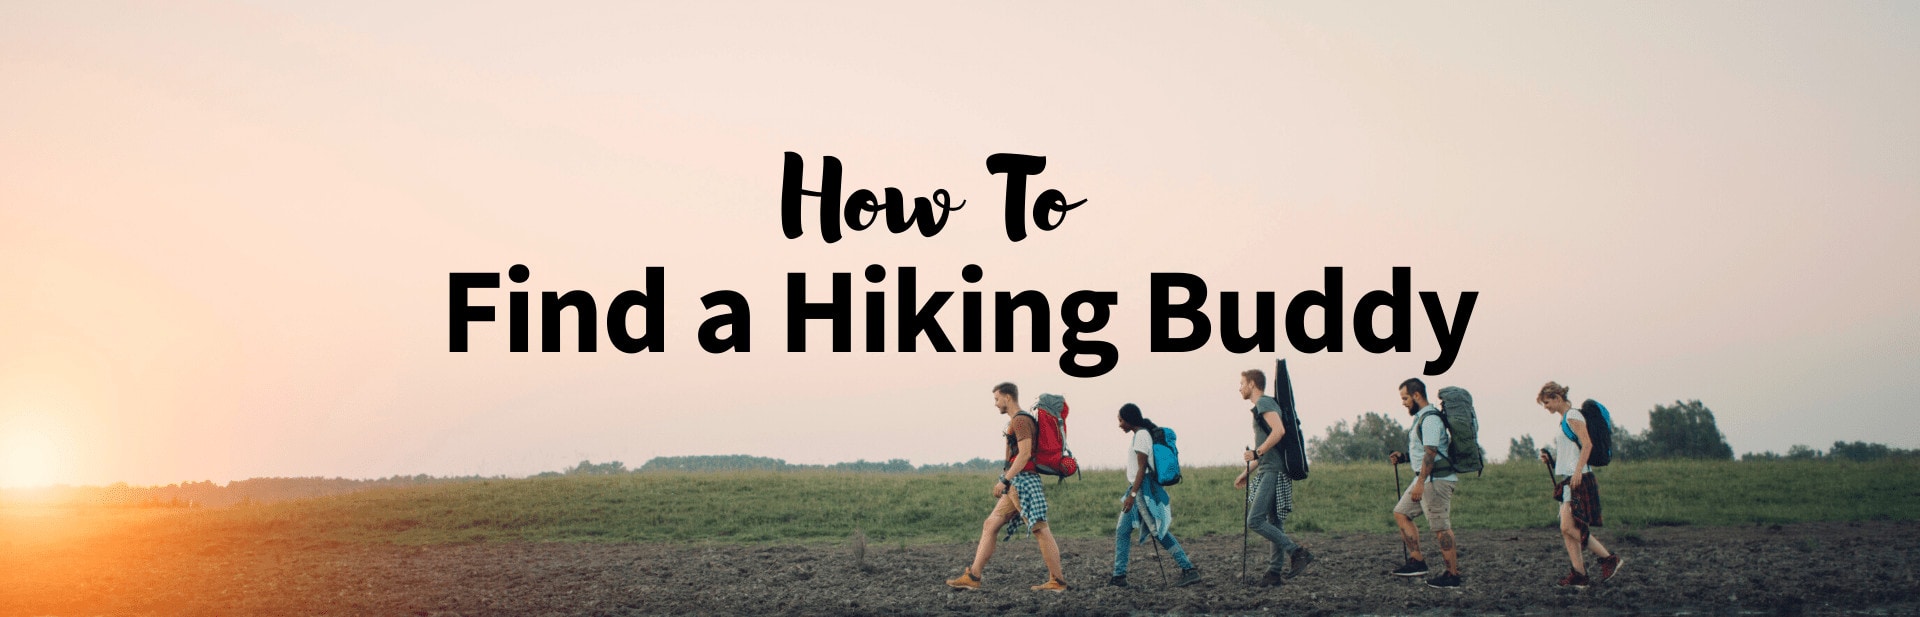 11 Ways to Find a Hiking Buddy or Hiking Group